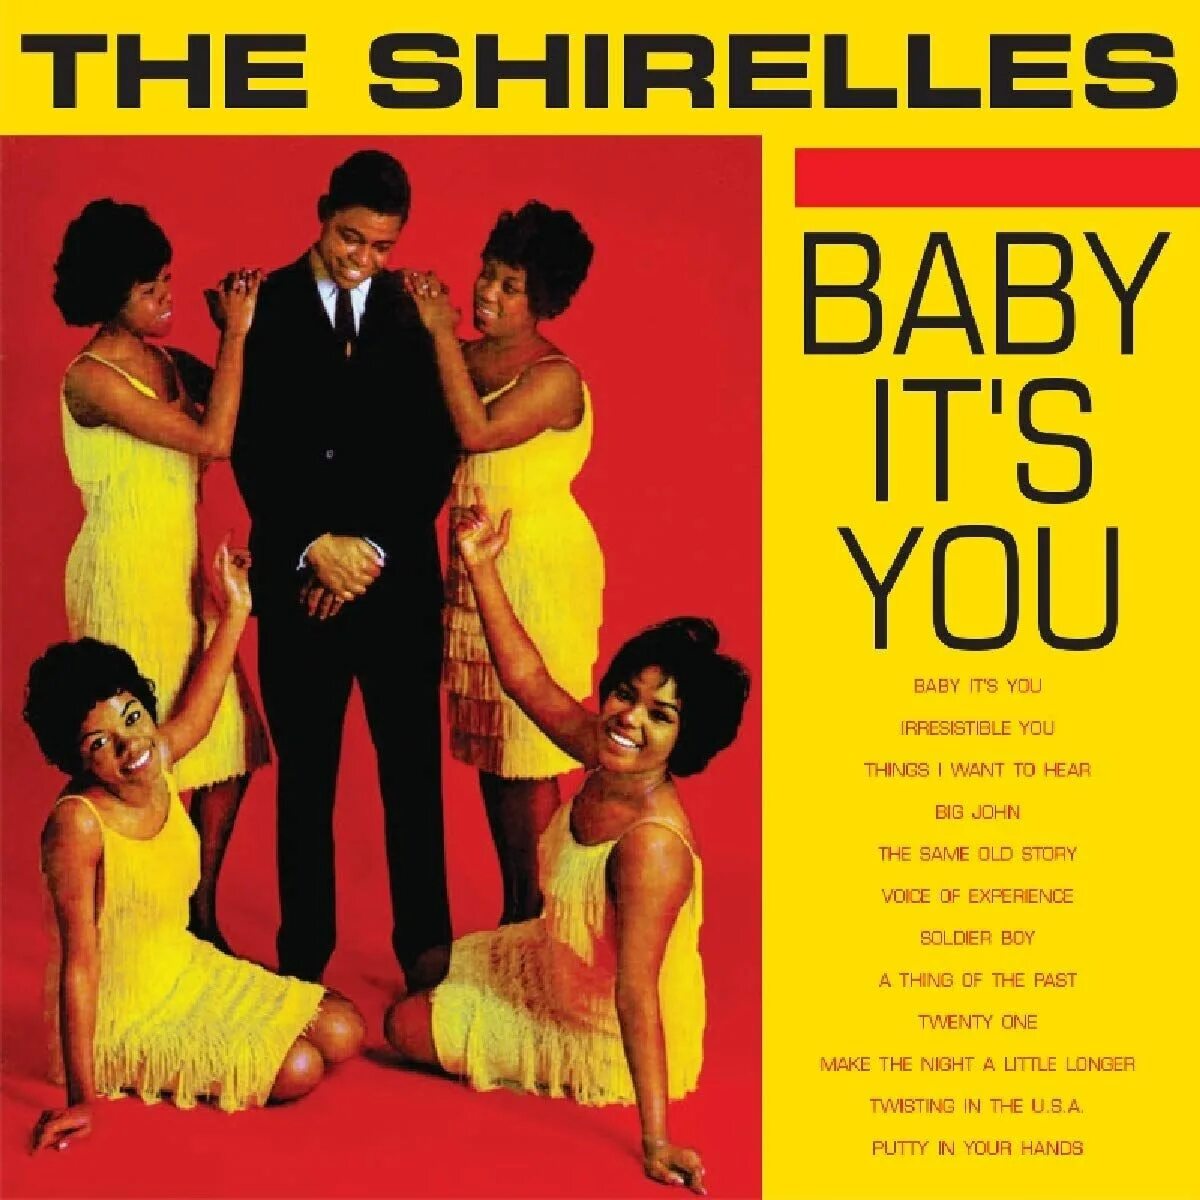 Baby it’s you the Shirelles. Shirelles "Singles collection". The Ohio Players Sweet Sticky thing. It's my Baby. Песня baby it s just lust